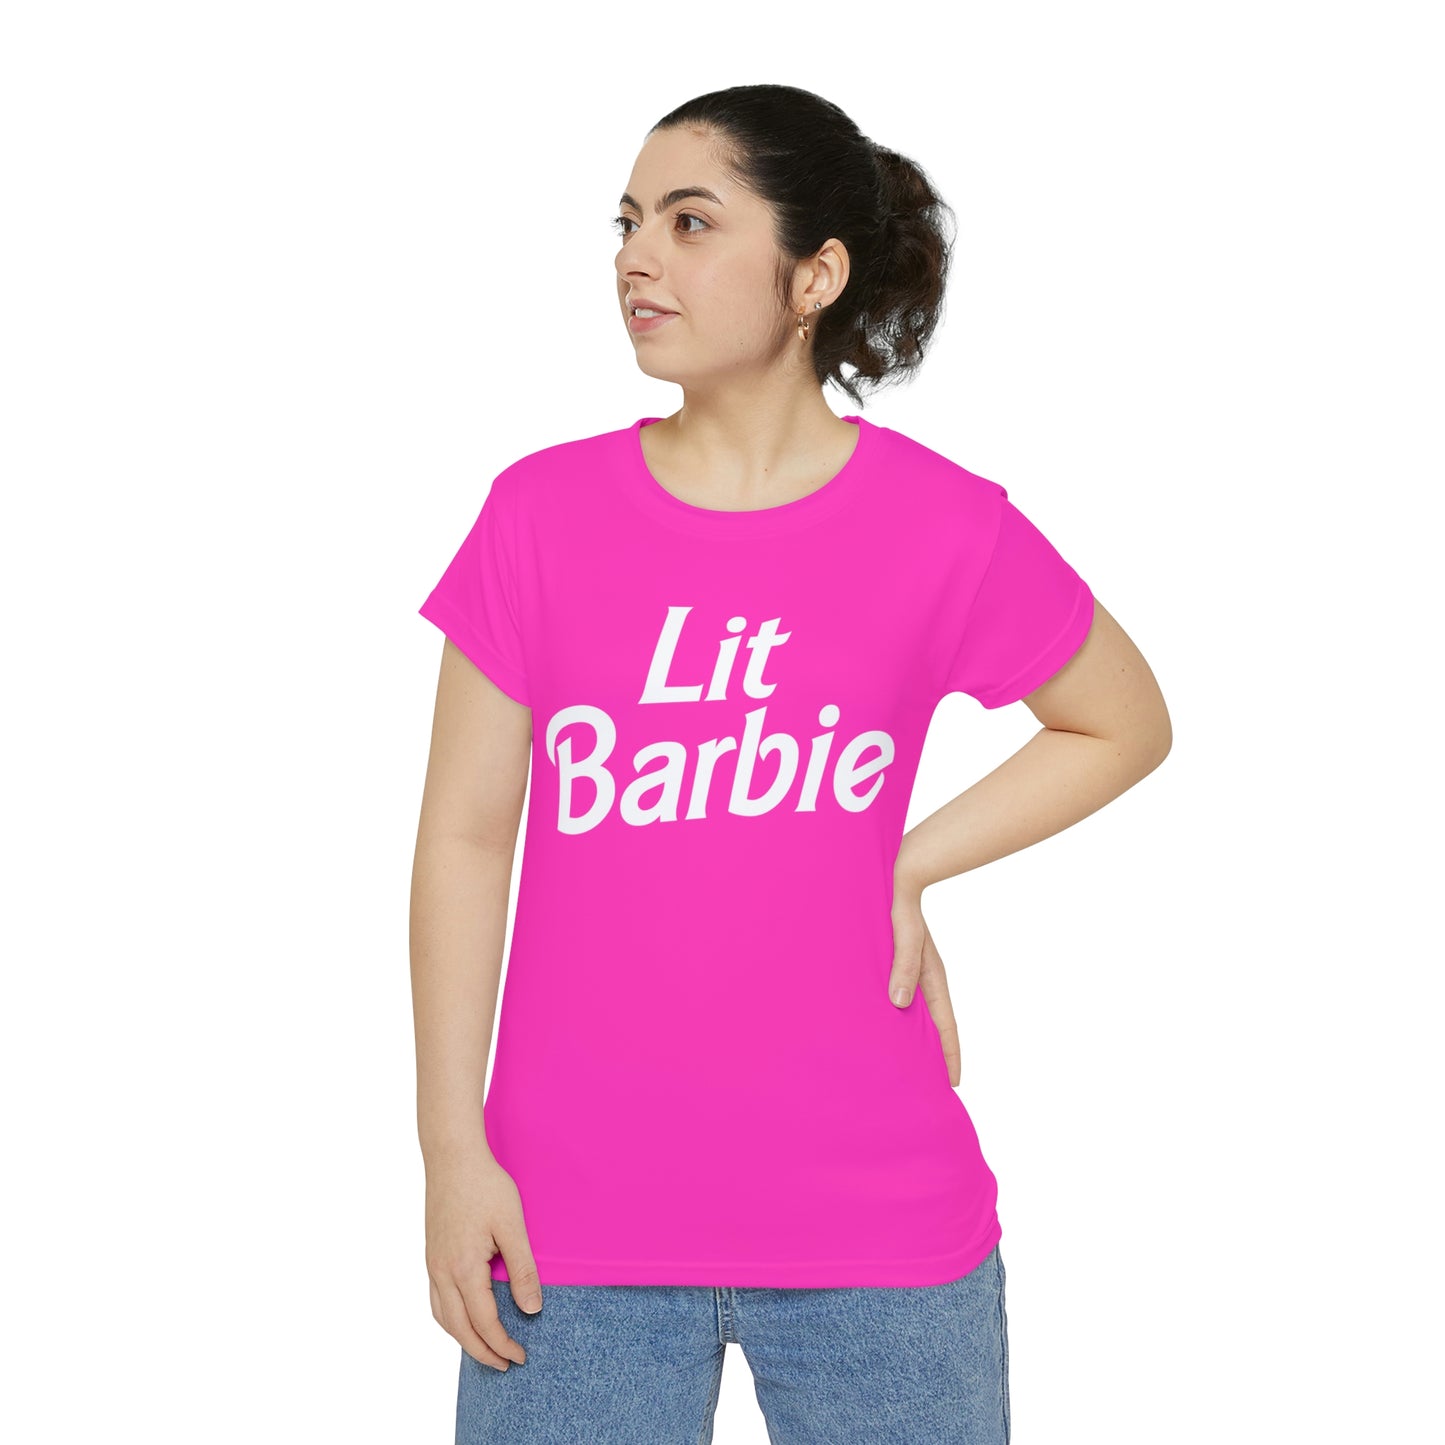 Lit Barbie, Bachelorette Party Shirts, Bridesmaid Gifts, Here comes the Party Tees, Group Party Favor Shirts, Bridal Party Shirt for women